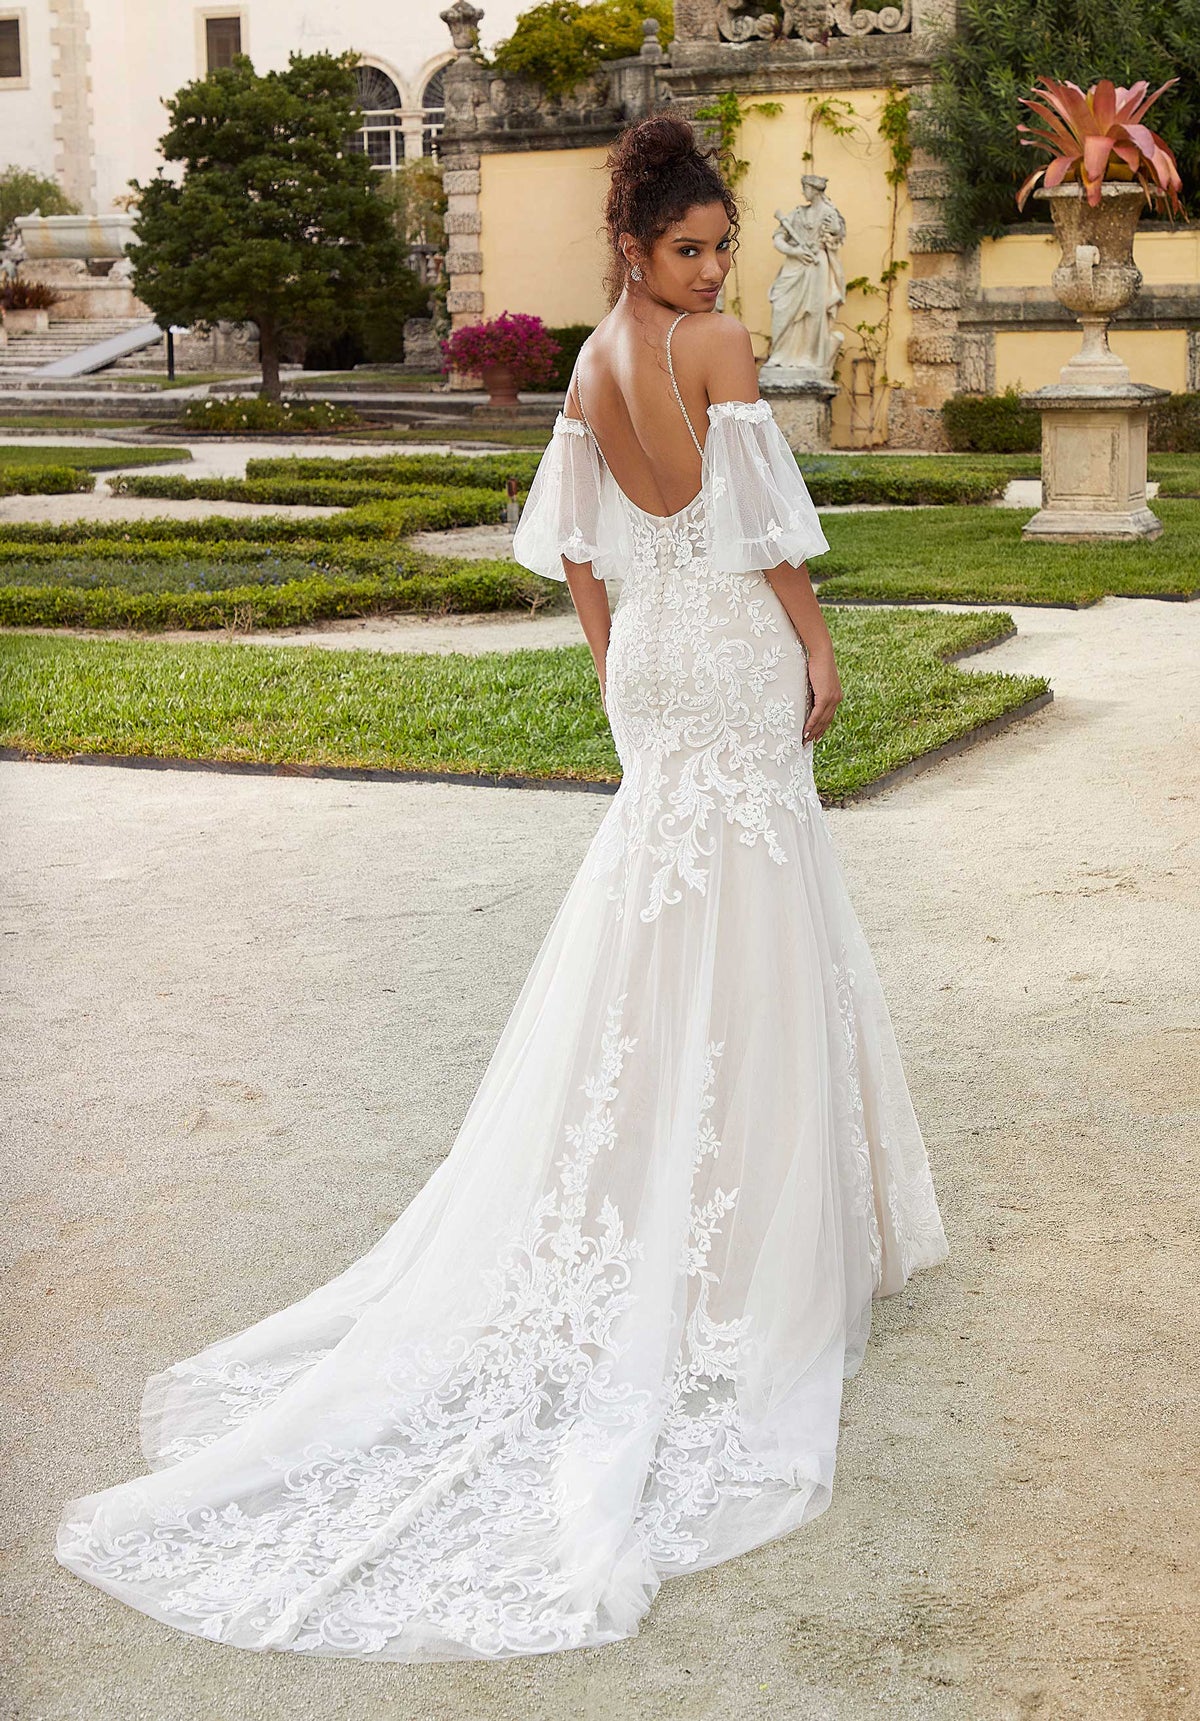 Morilee - 2469 - Floriana - Cheron's Bridal, Wedding Gown - Morilee Line - - Wedding Gowns Dresses Chattanooga Hixson Shops Boutiques Tennessee TN Georgia GA MSRP Lowest Prices Sale Discount